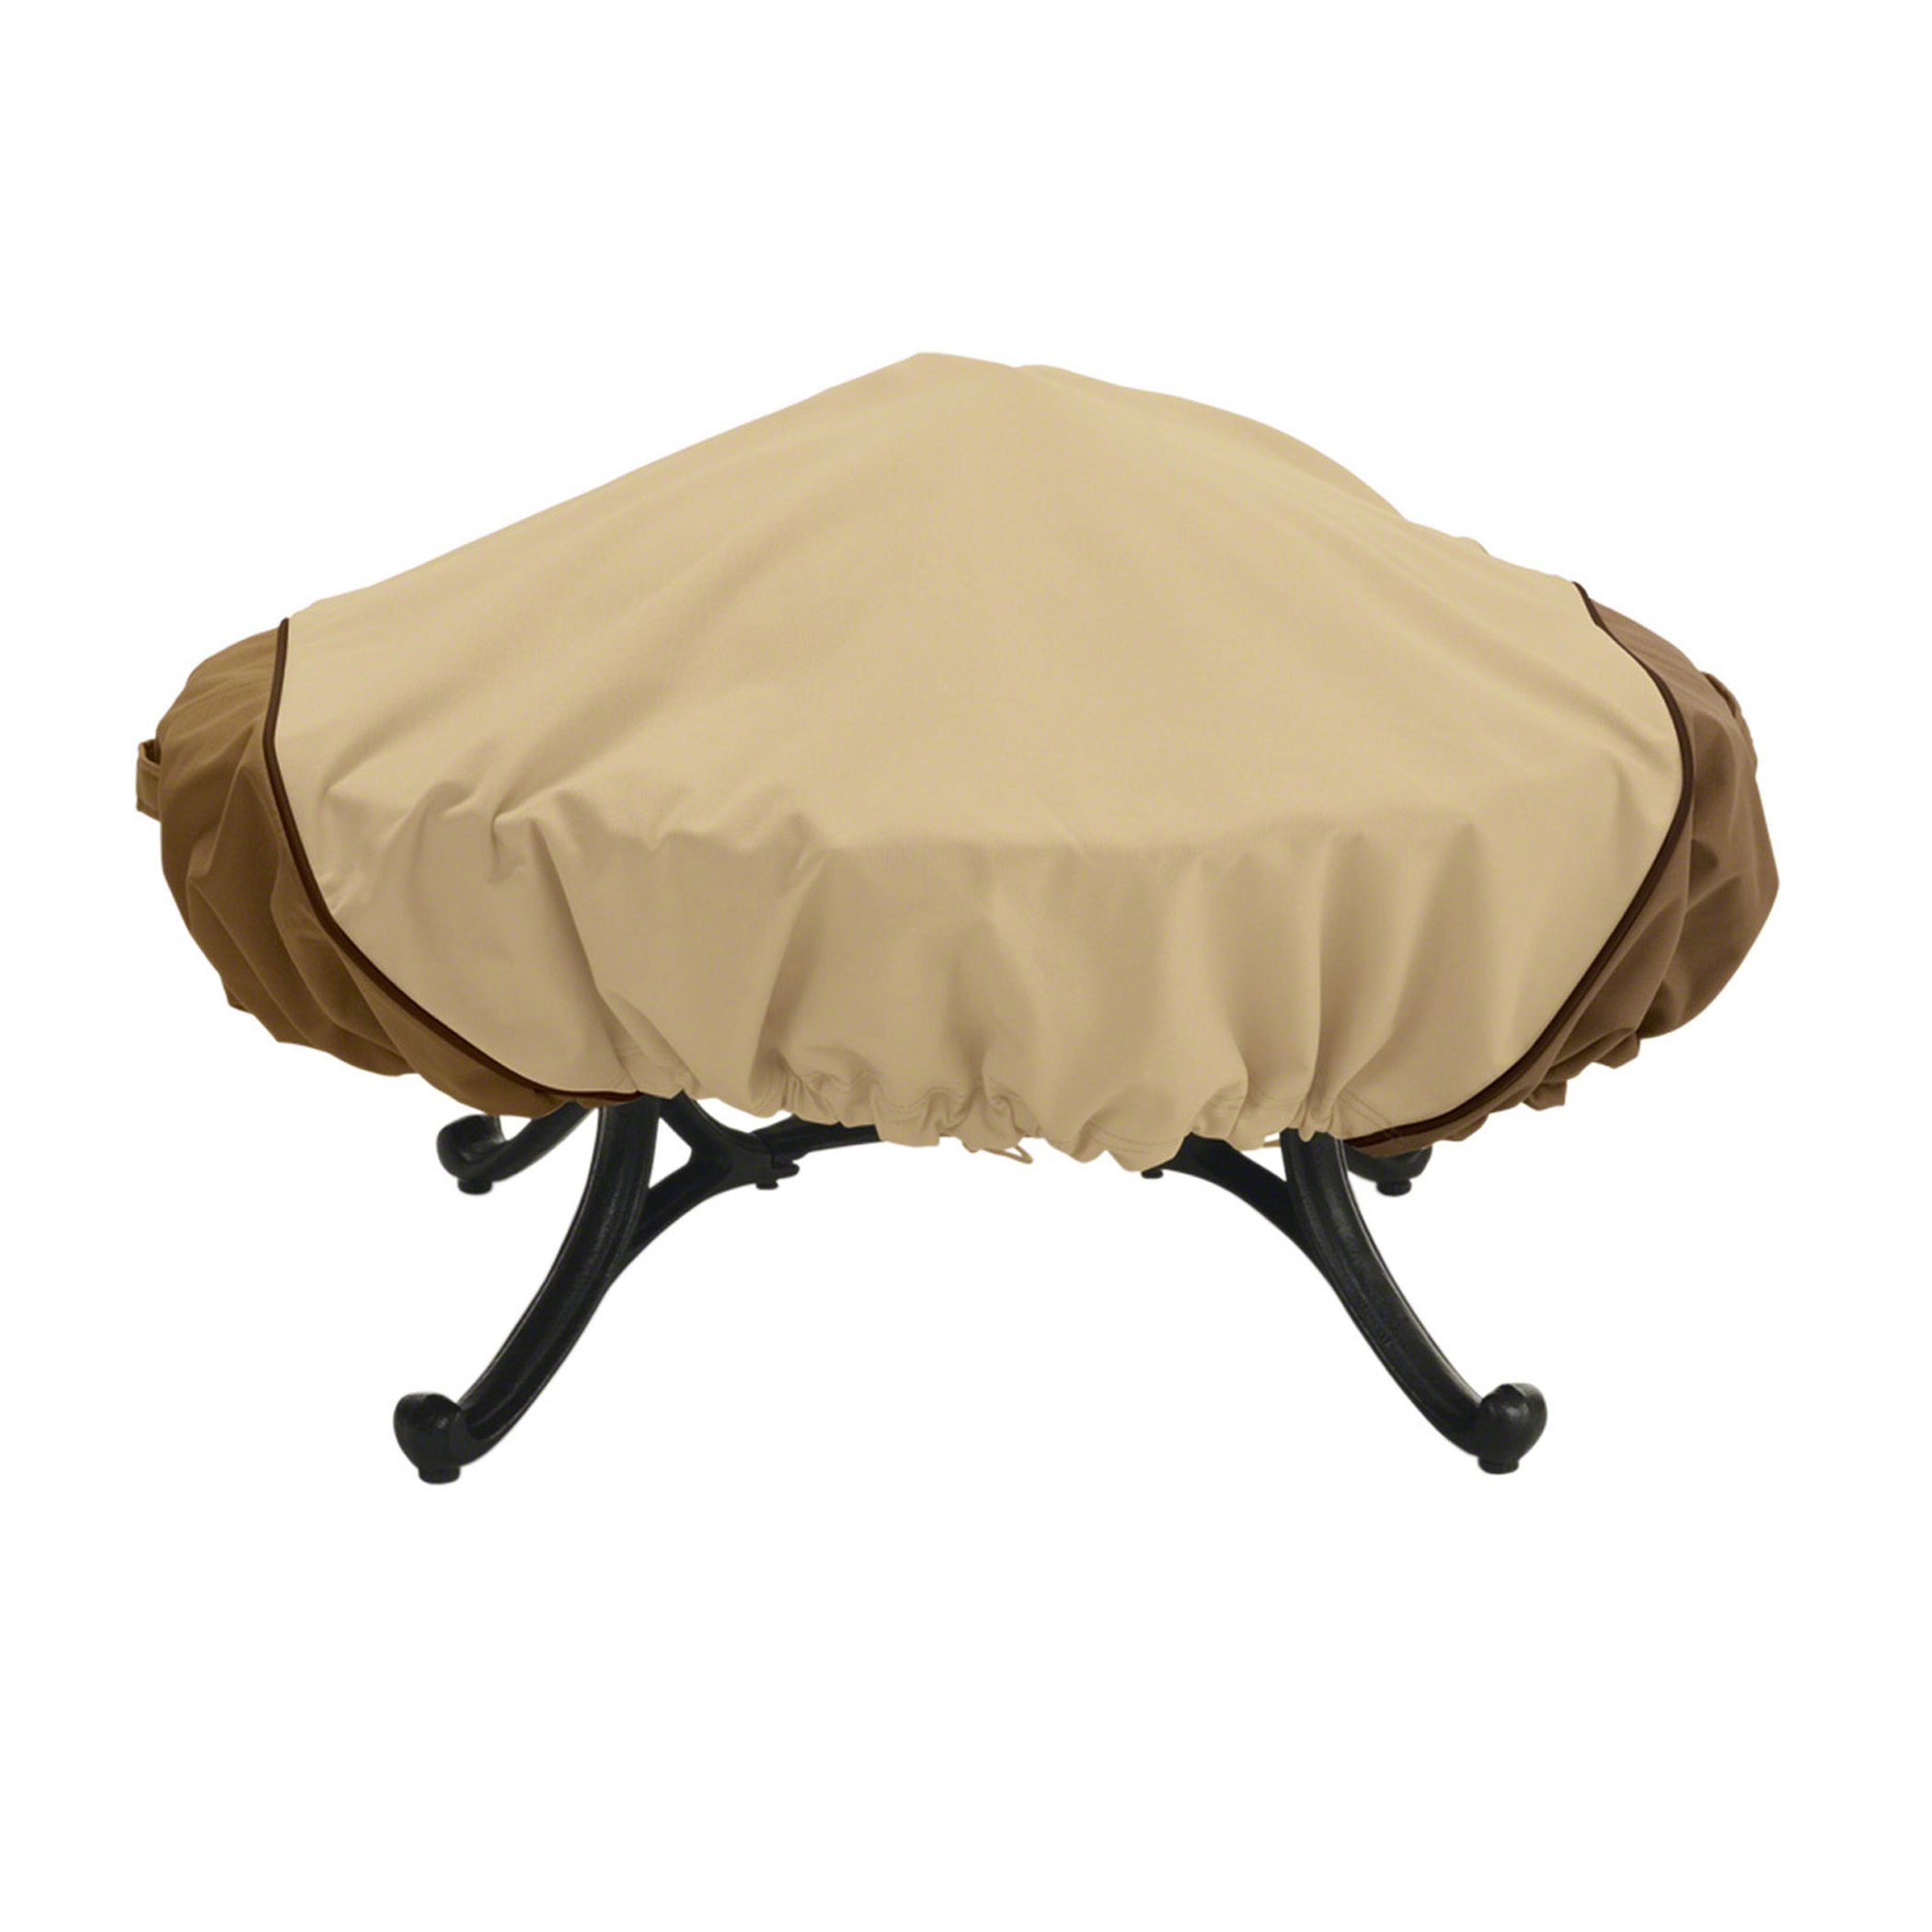 Classic Accessories Veranda™ Round Fire Pit Cover, Large - image 1 of 17